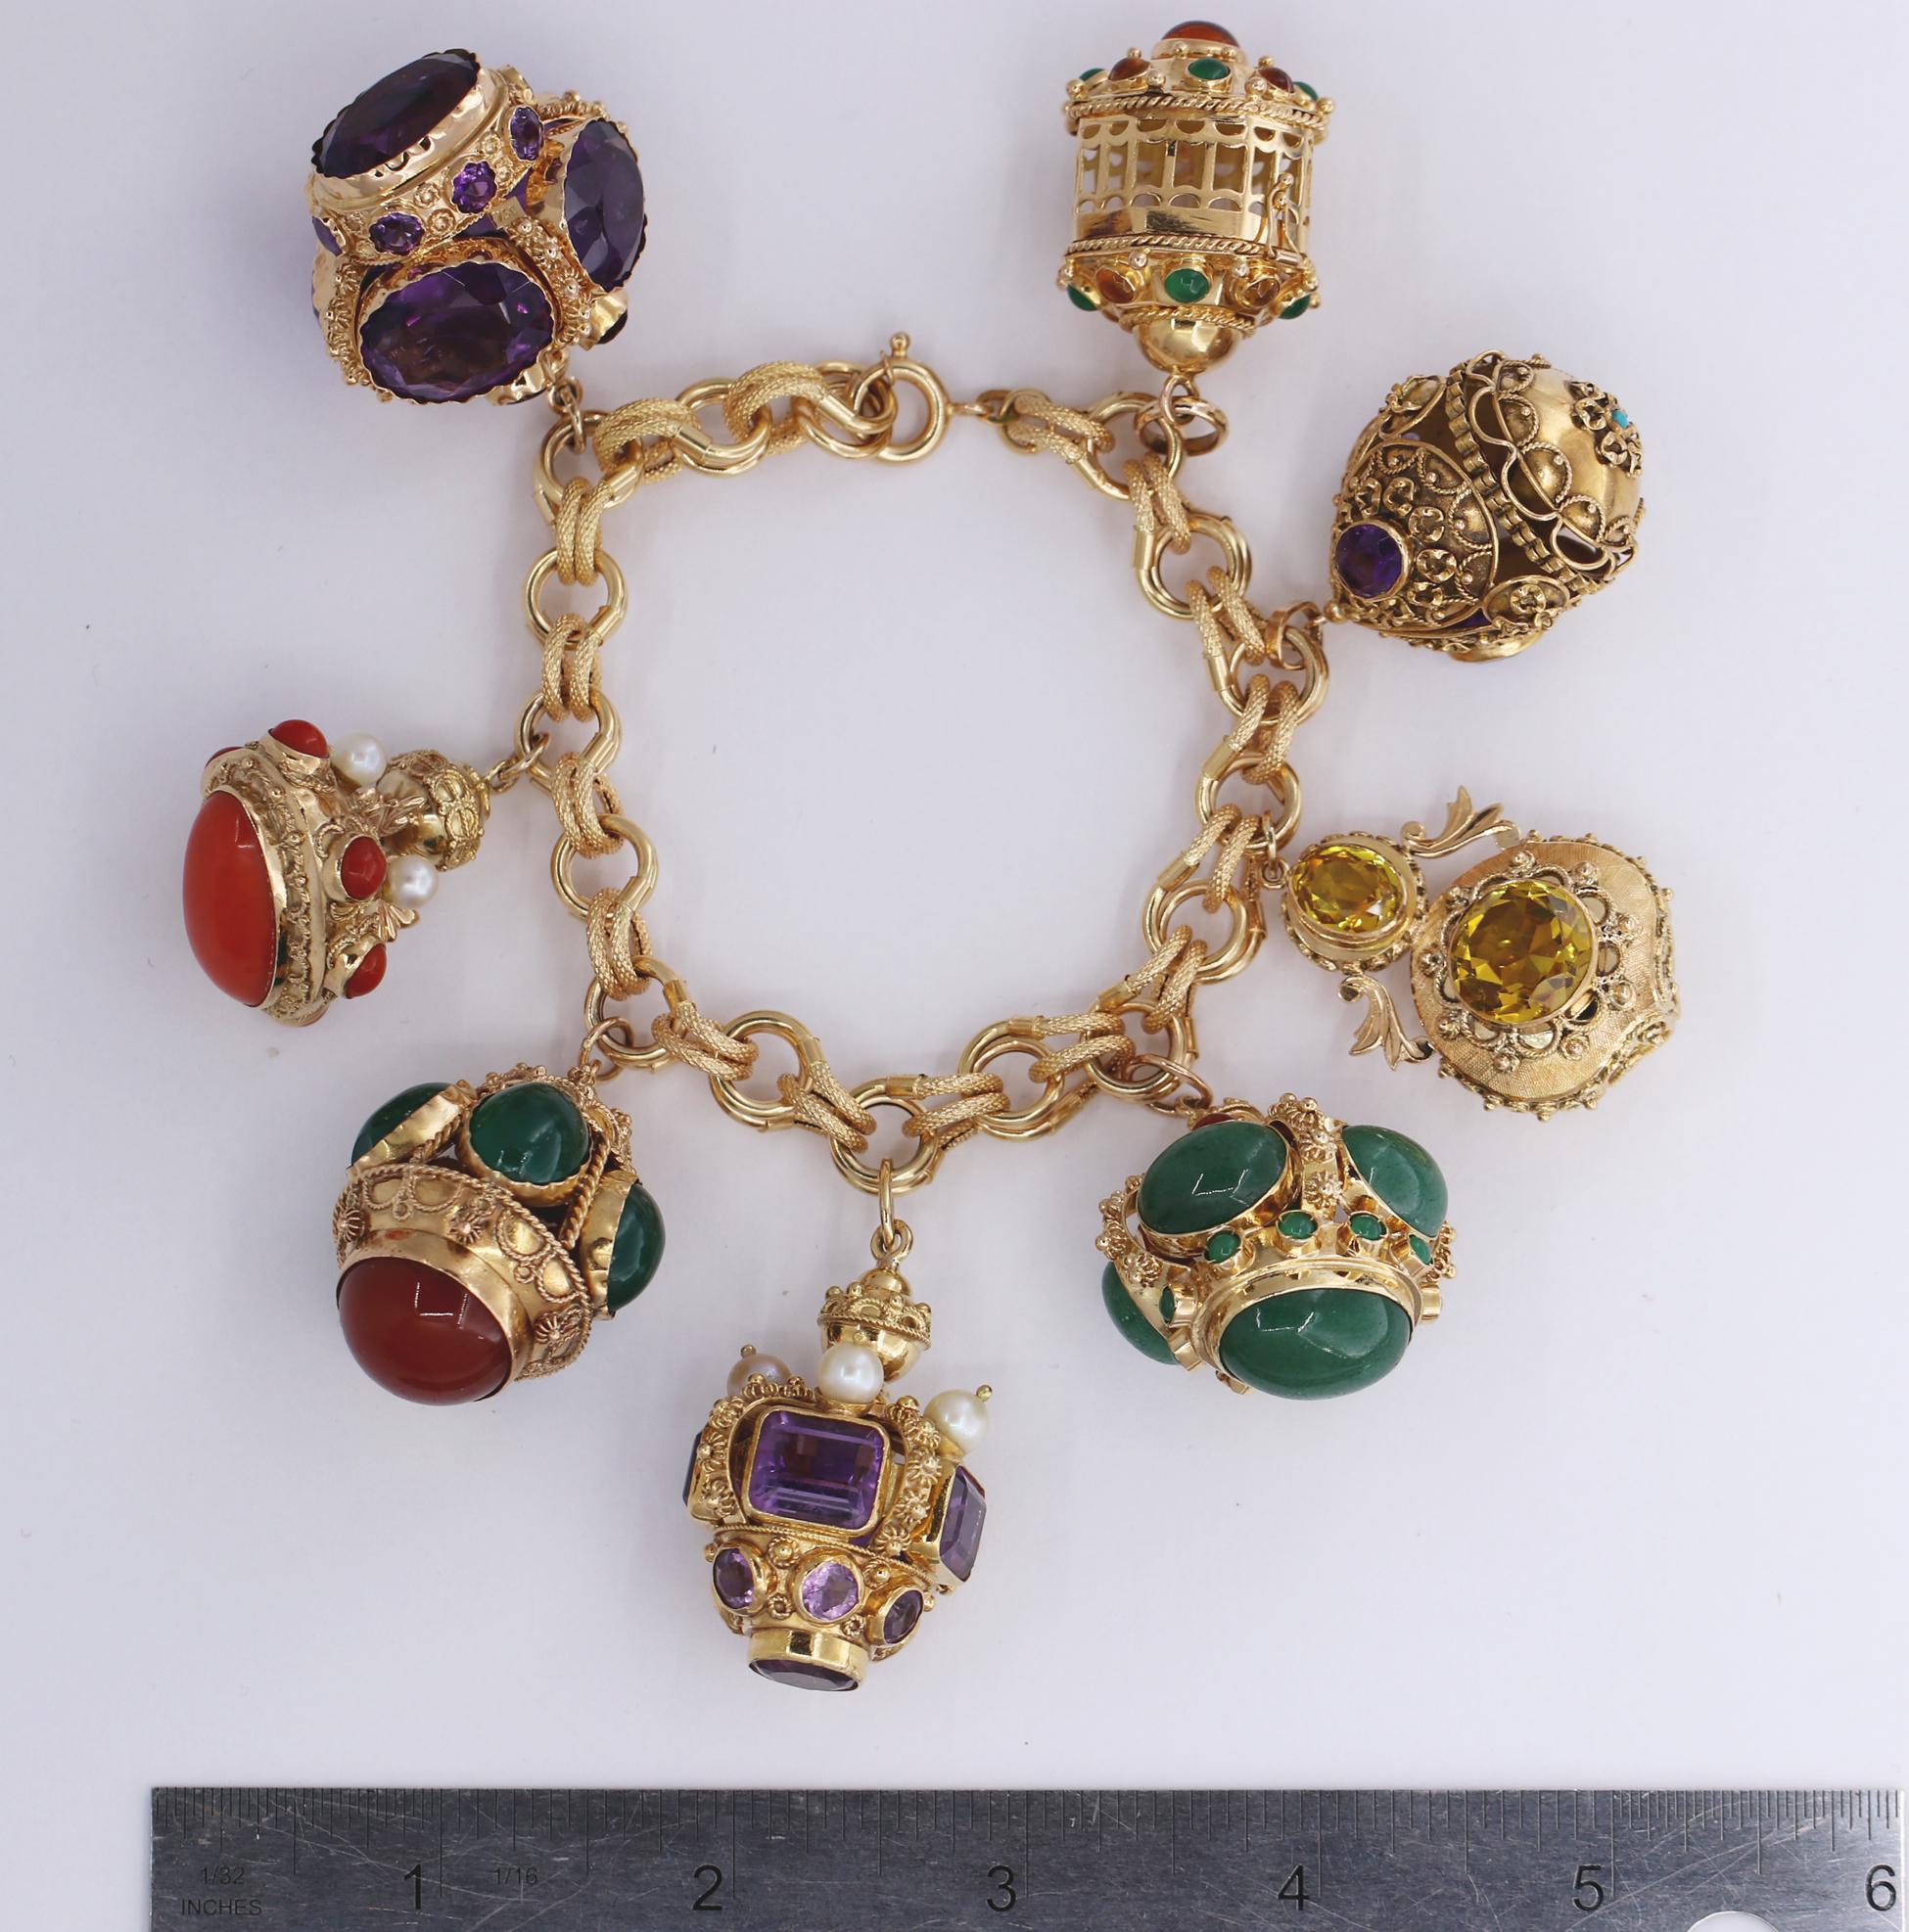 Midcentury Large Italian Gold Charm Bracelet with Assorted Colored Stones 1